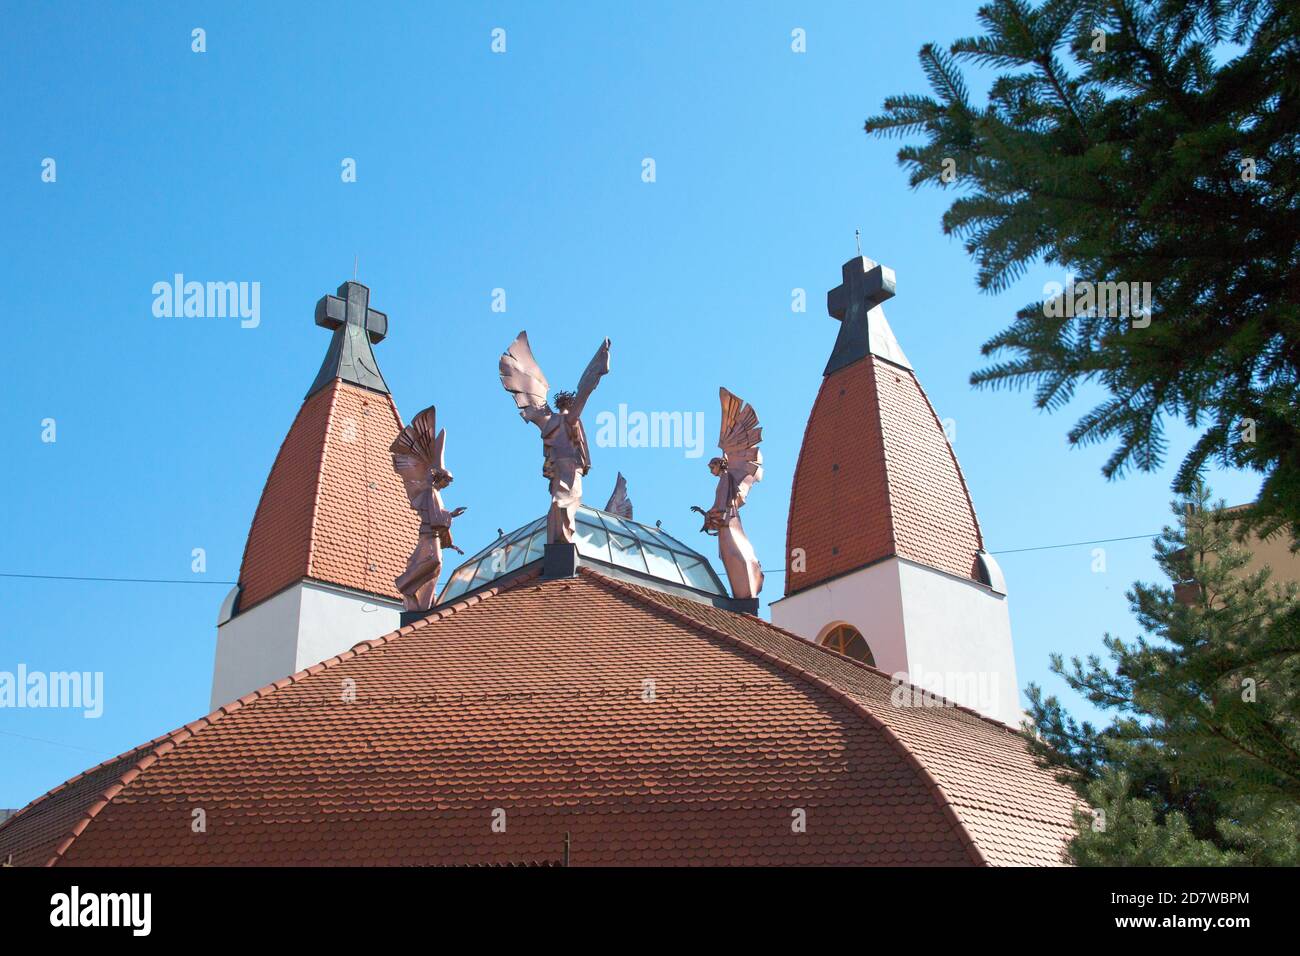 Millennium Catholic Church designed by Makovecz. The copper angel statues depict the great angels of St. Michael, Gabriel, Raphael and Uriel. Stock Photo